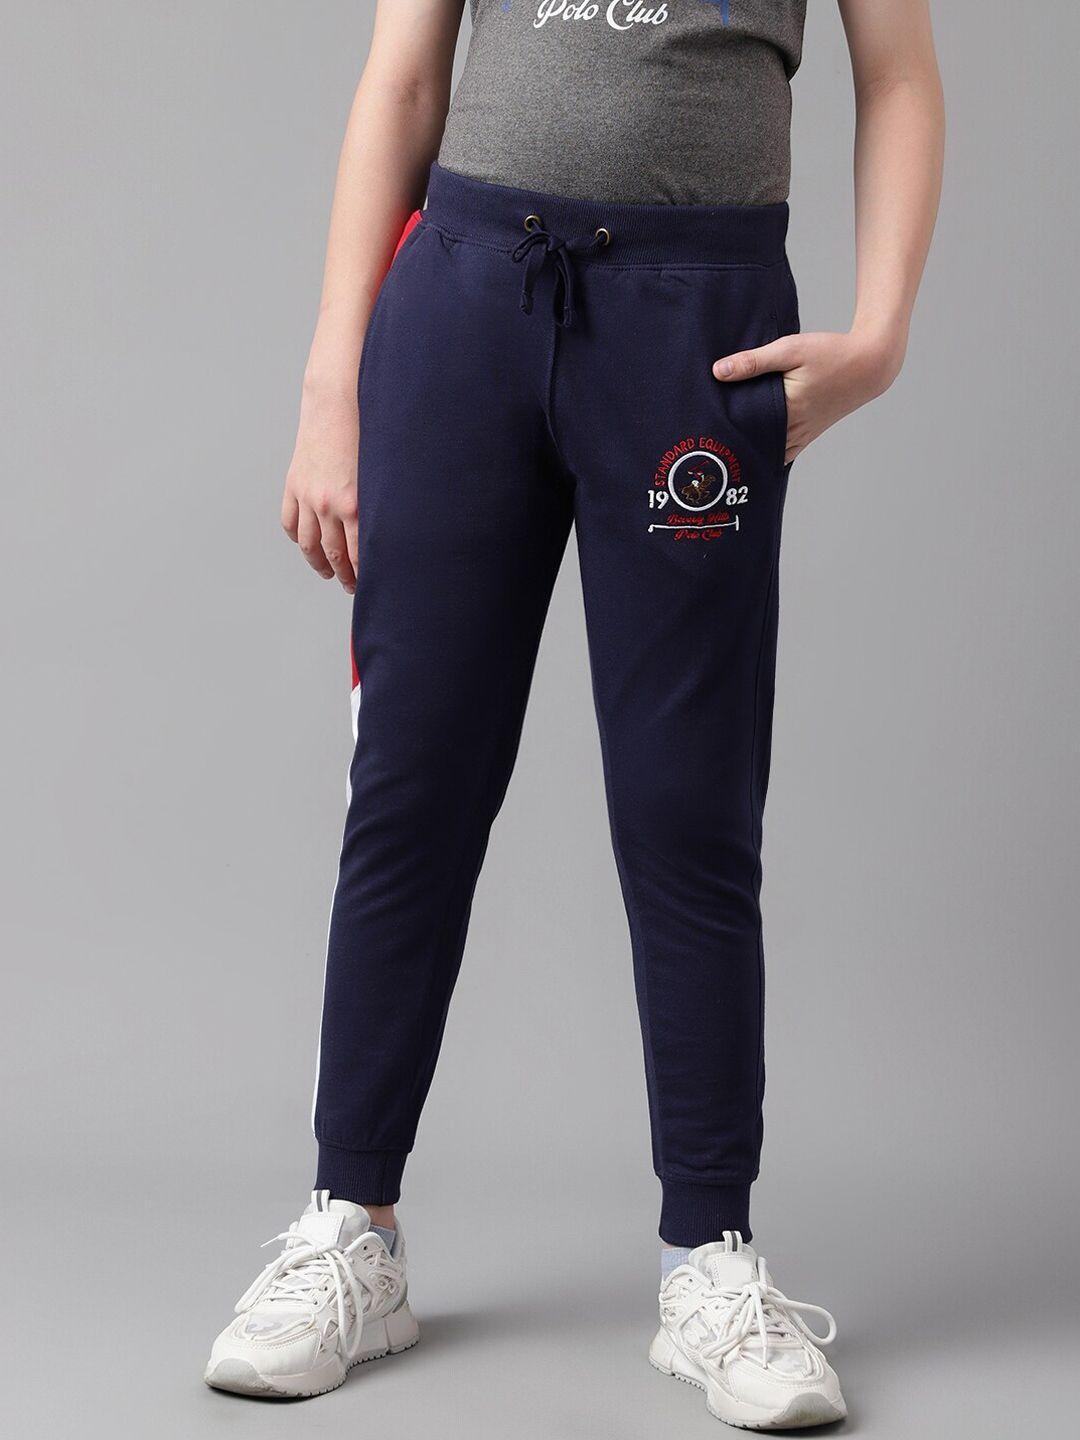 beverly hills polo club boys printed pure cotton joggers